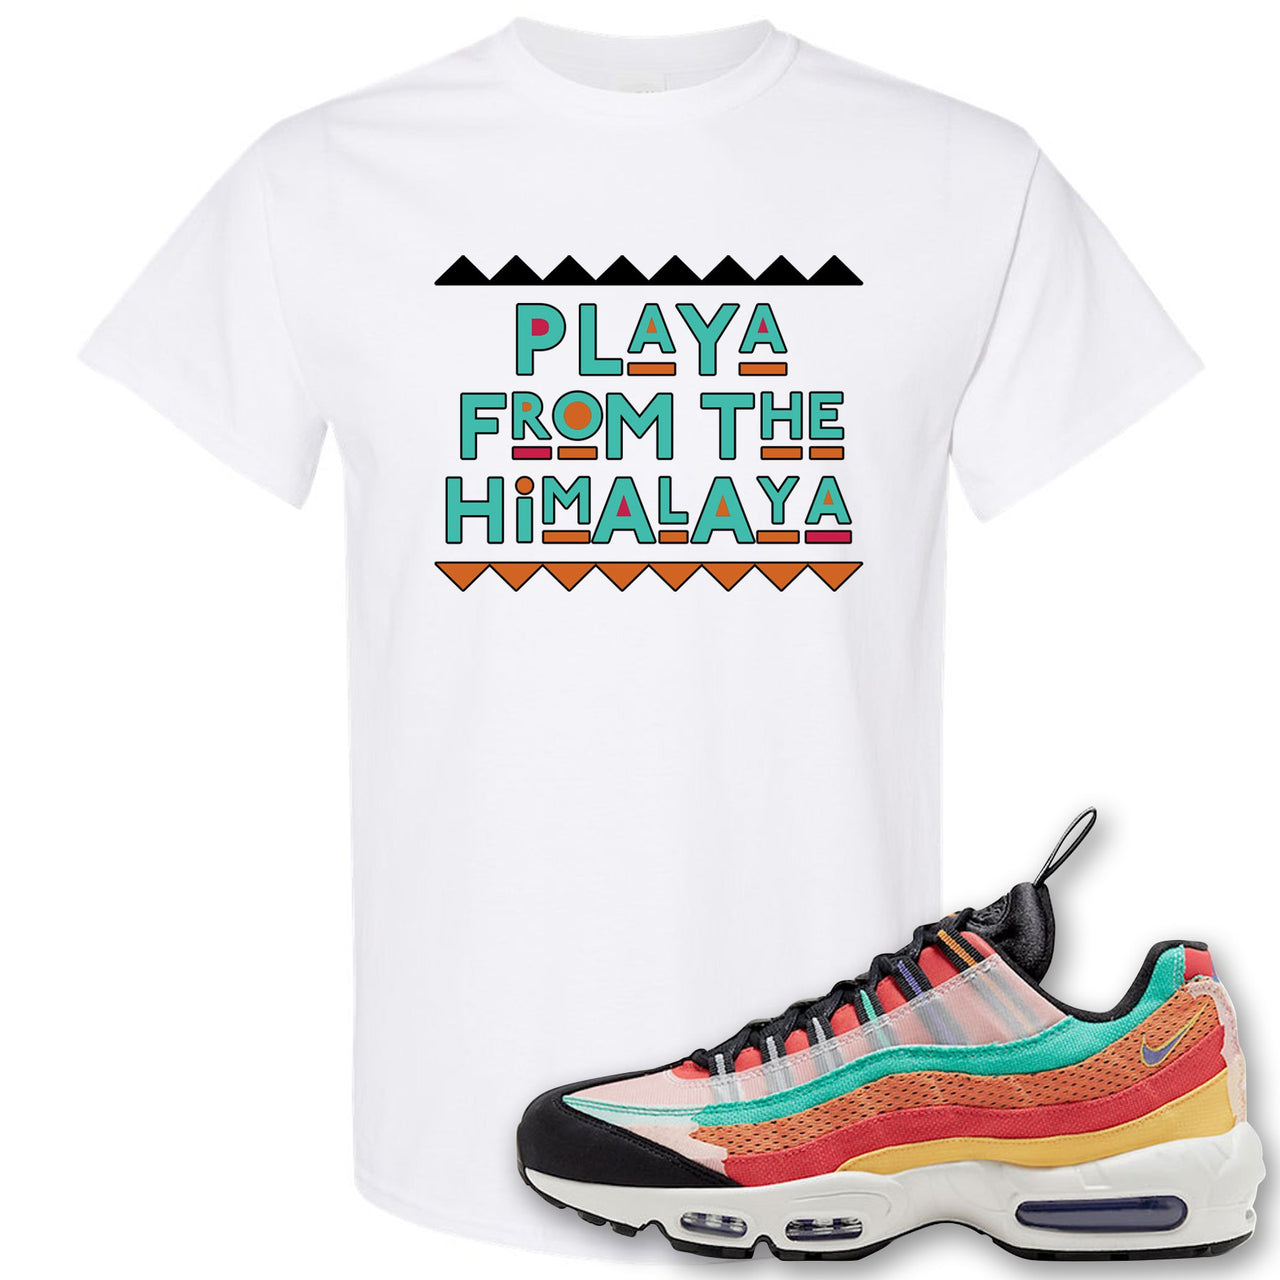 Air Max 95 Black History Month Sneaker White T Shirt | Tees to match Nike Air Max 95 Black History Month Shoes | Playa From The Himalaya